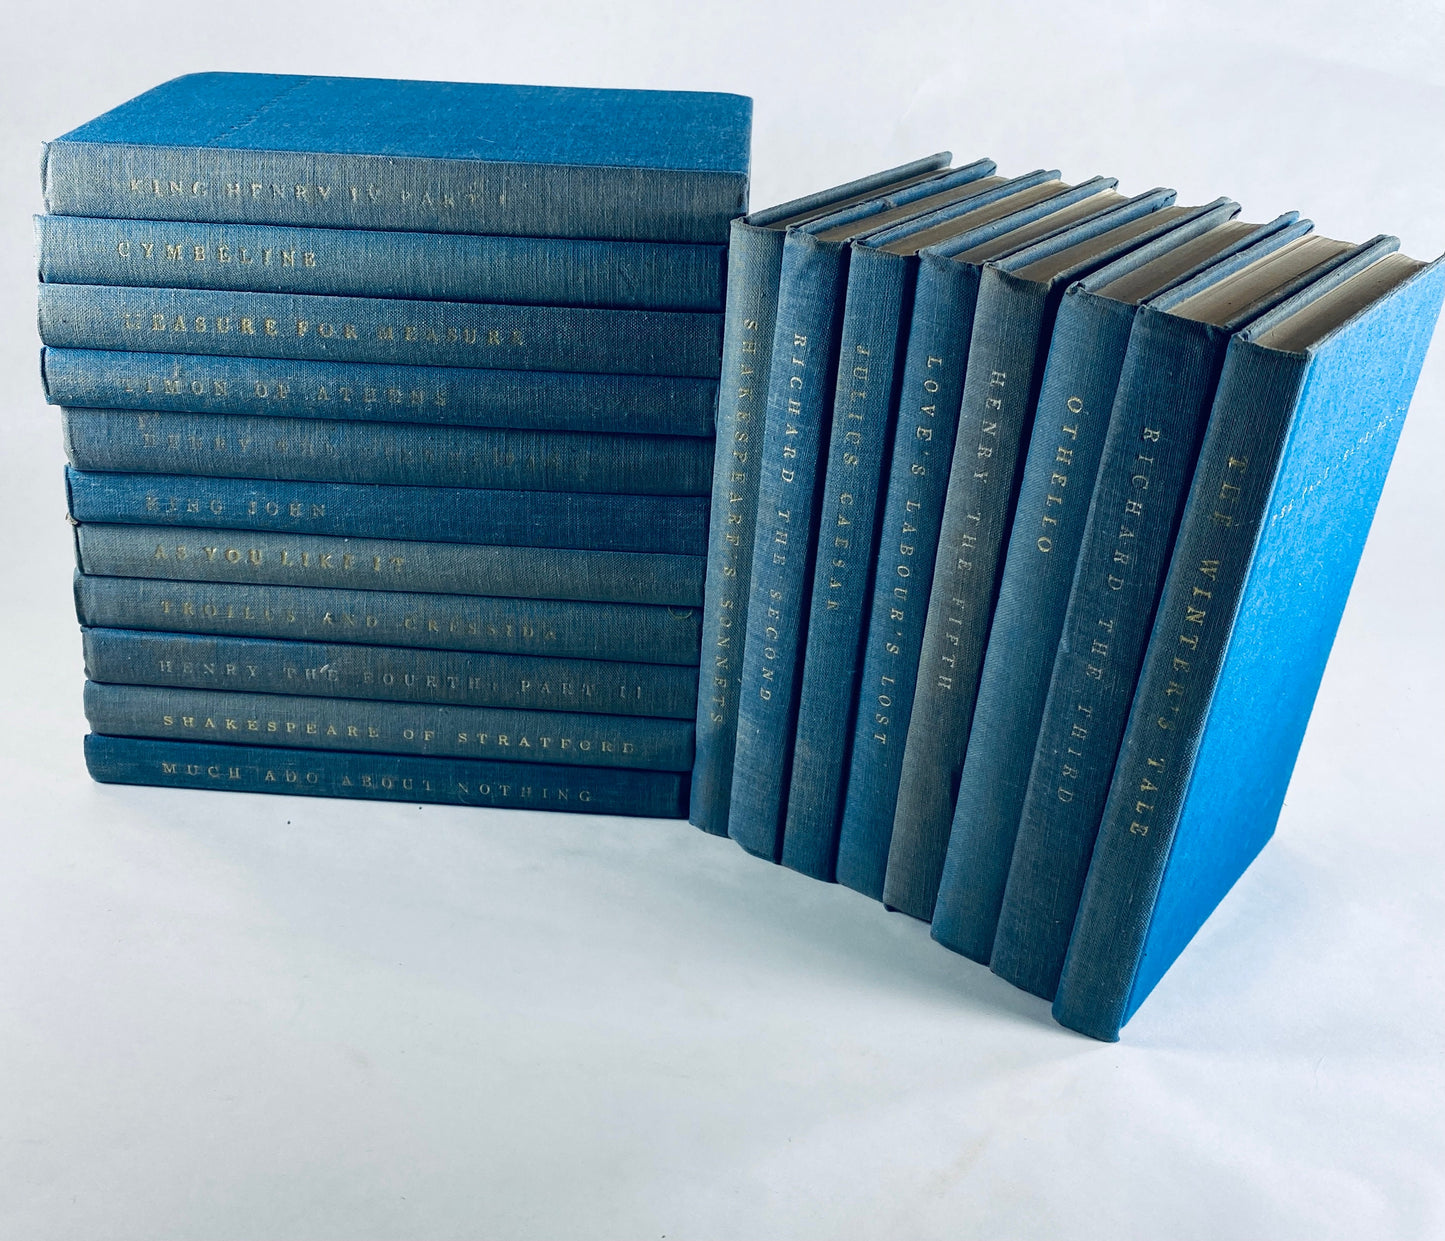 1961 Yale Shakespeare Blue book vintage books PICK ONE! Plays, poetry & sonnets King Lear Macbeth Romeo and Juliet Anthony and Cleopatra sky